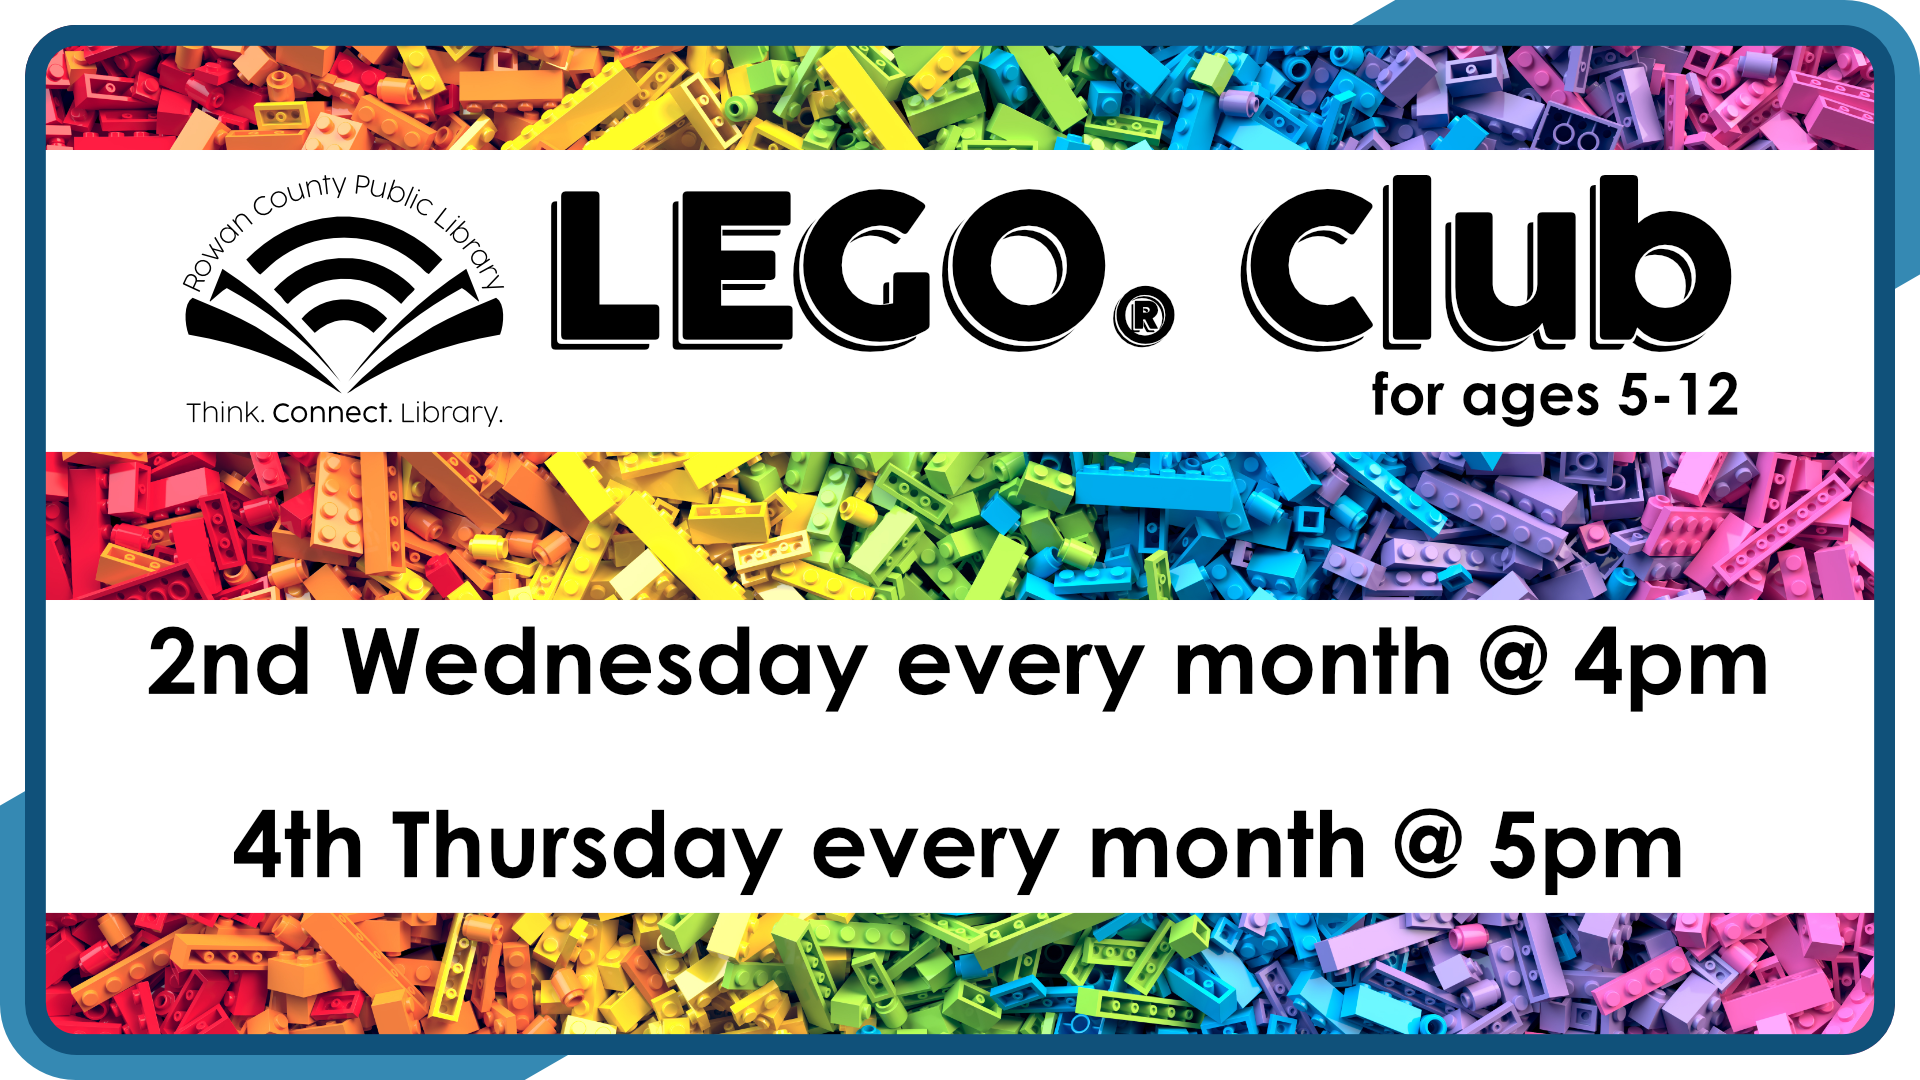 LEGO® Club, second Wednesday monthly at 4pm and fourth Thursday monthly at 5pm, intended for ages 5-12